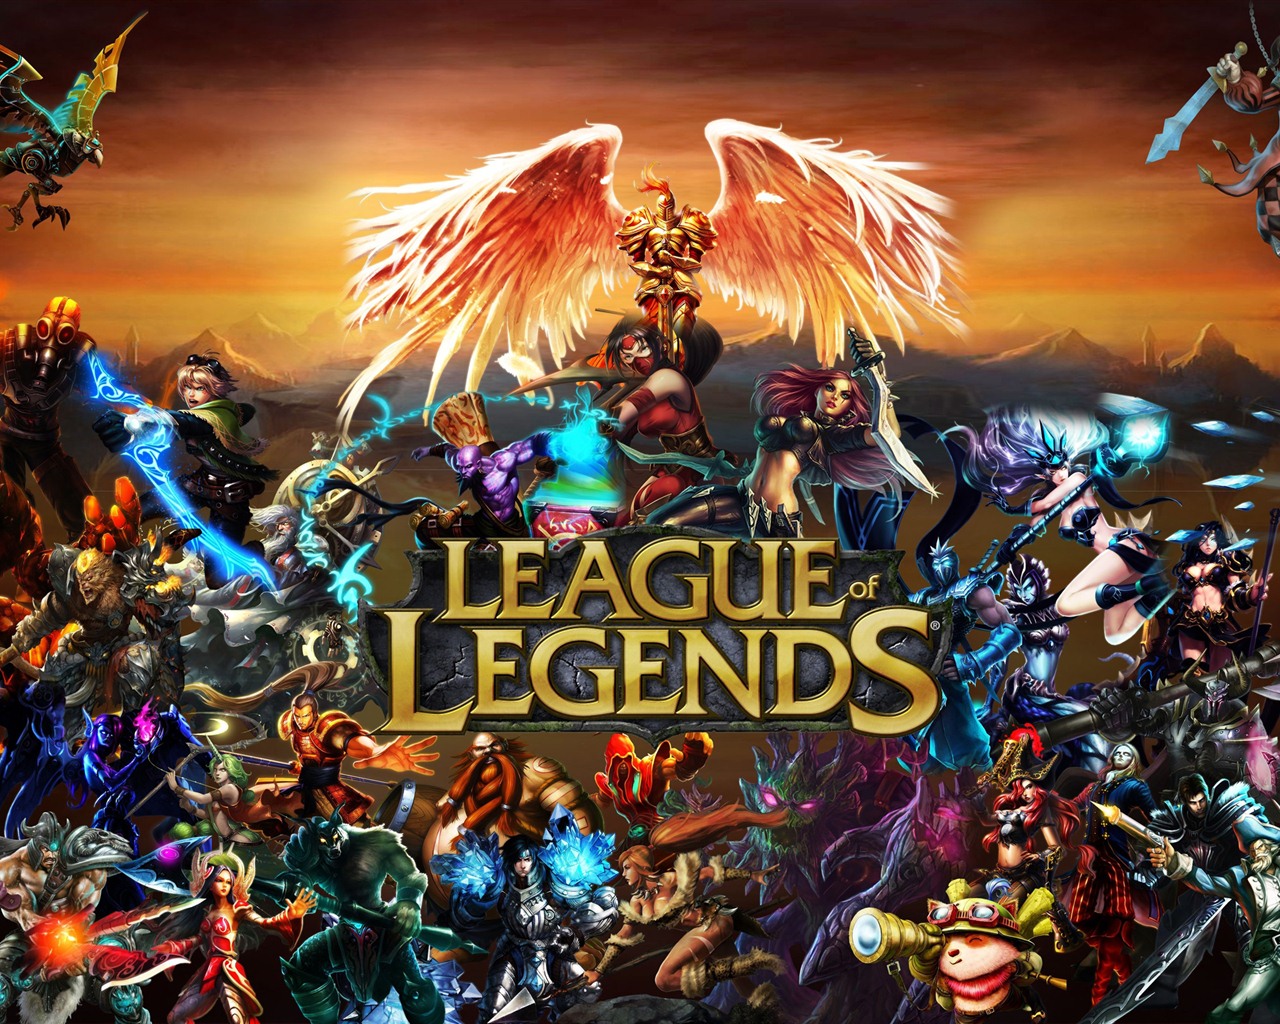 League of Legends game HD wallpapers #1 - 1280x1024